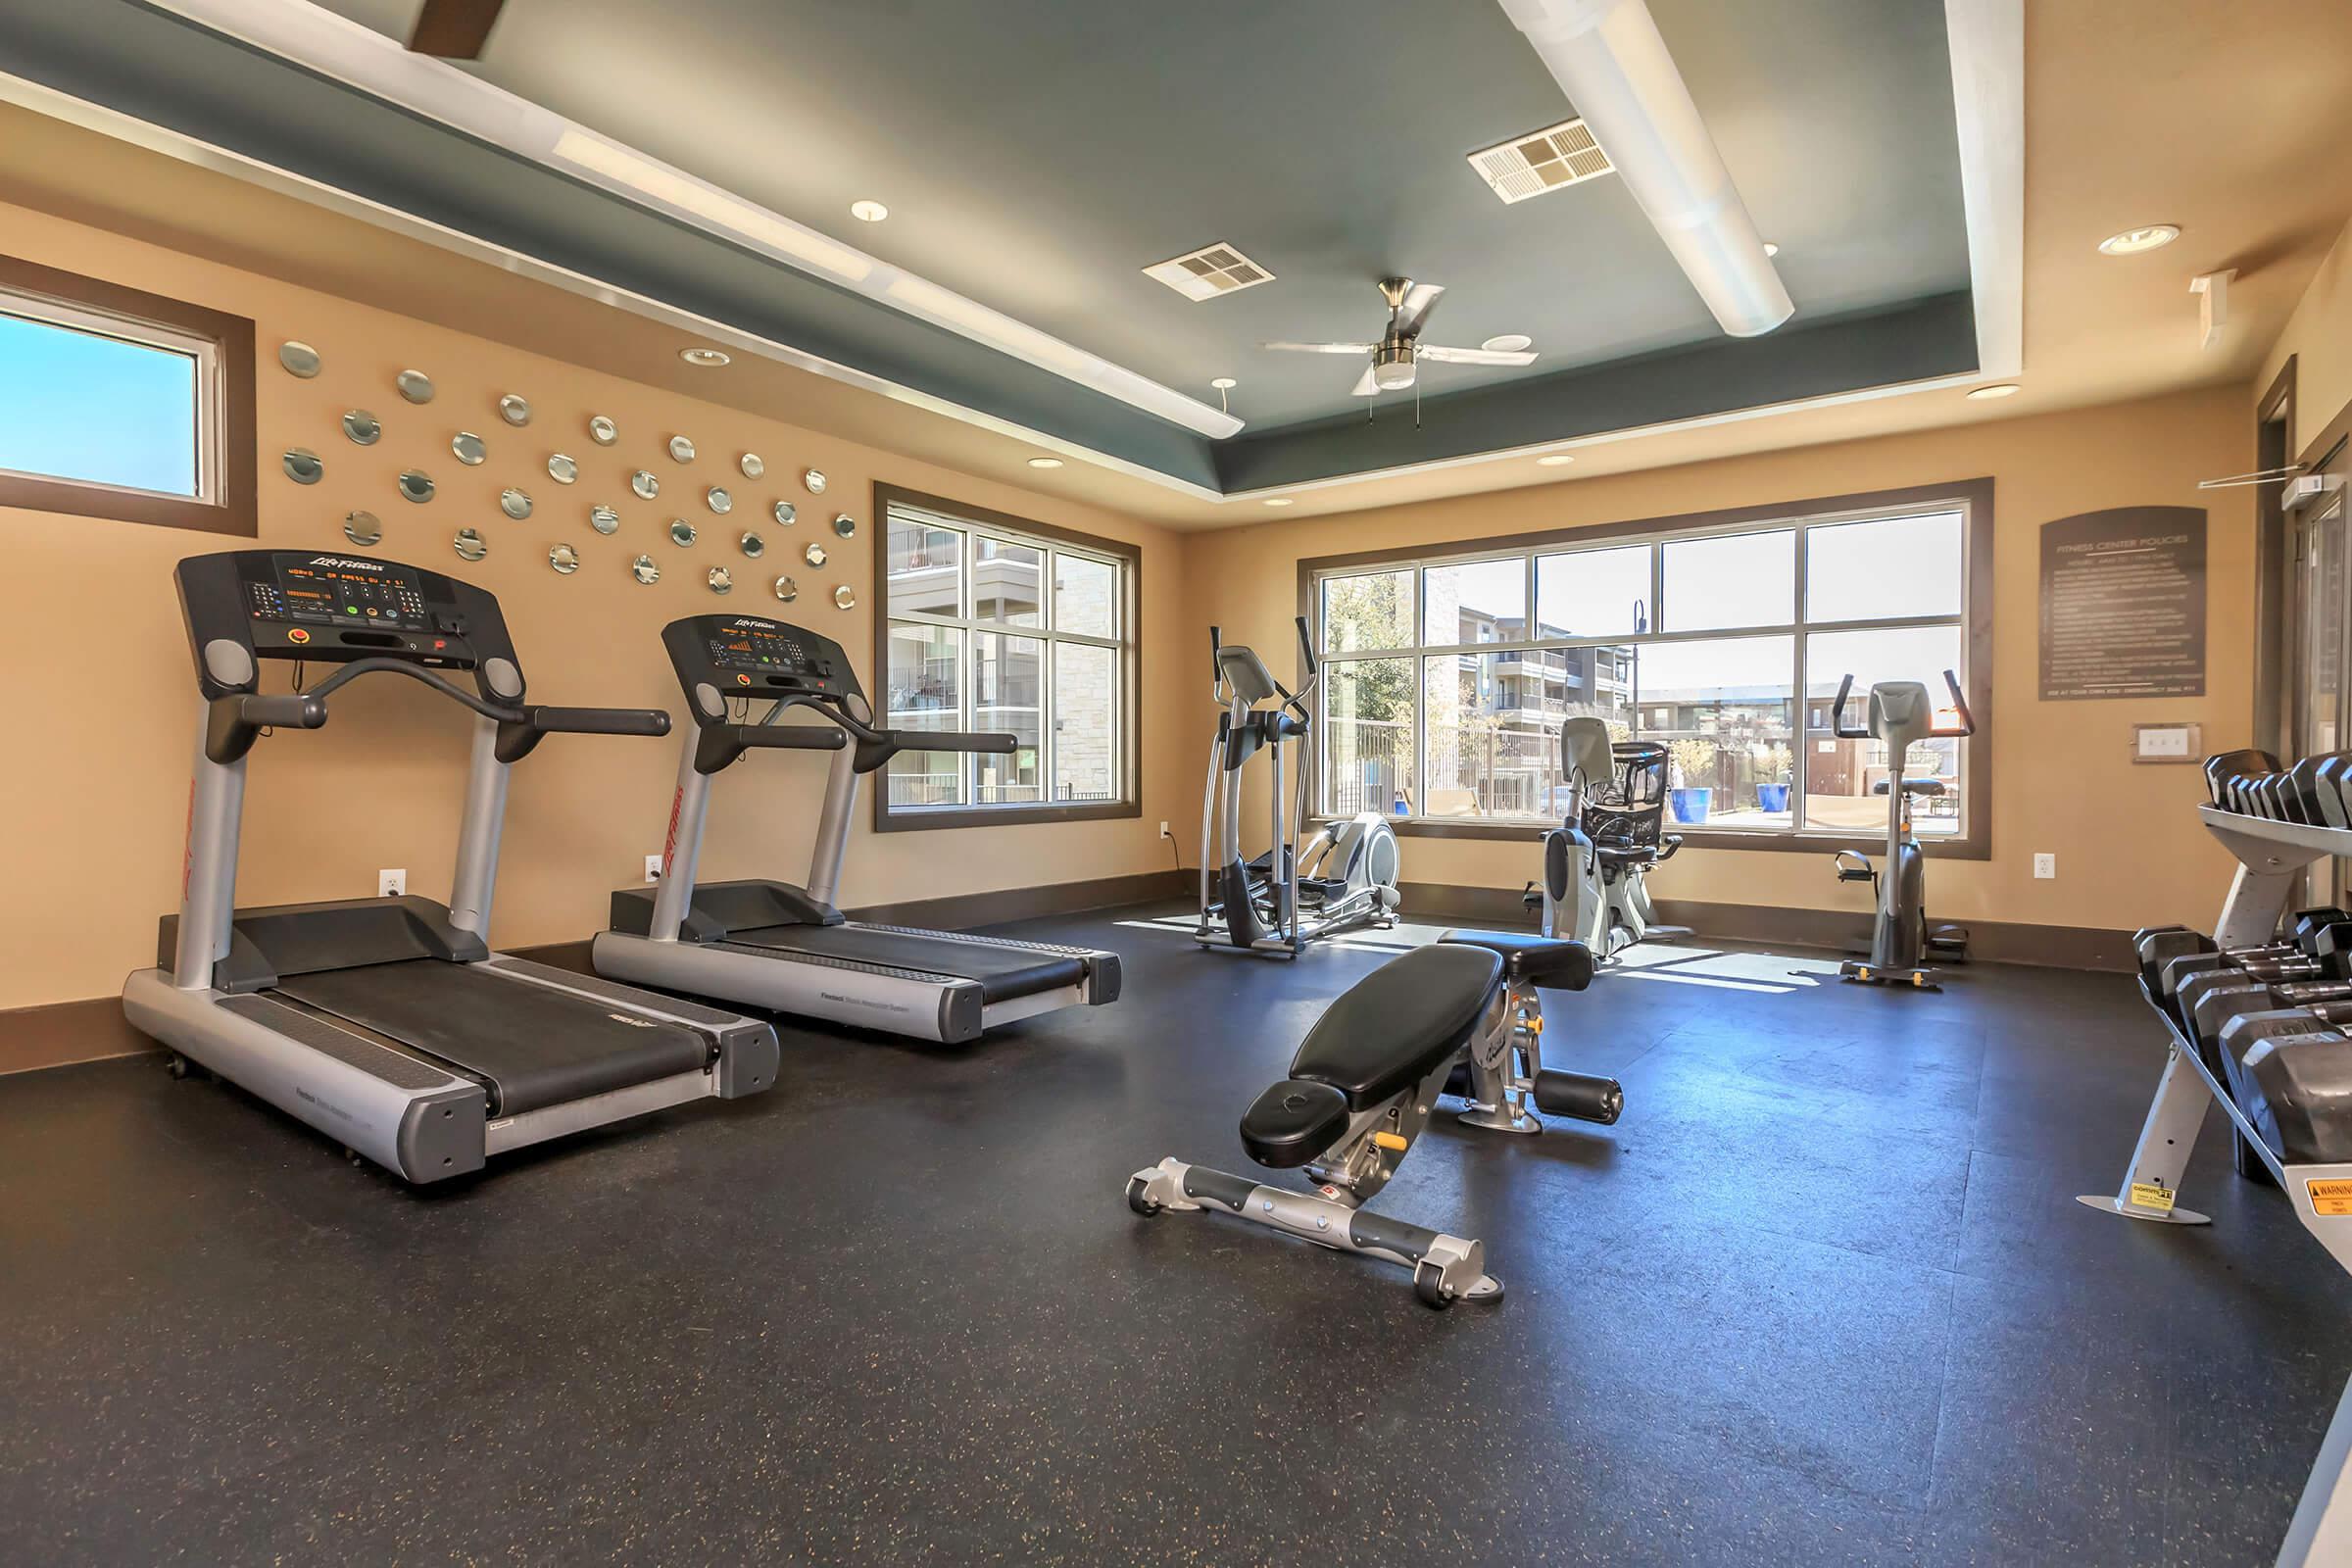 The fitness center at Lotus Village in Austin, Texas